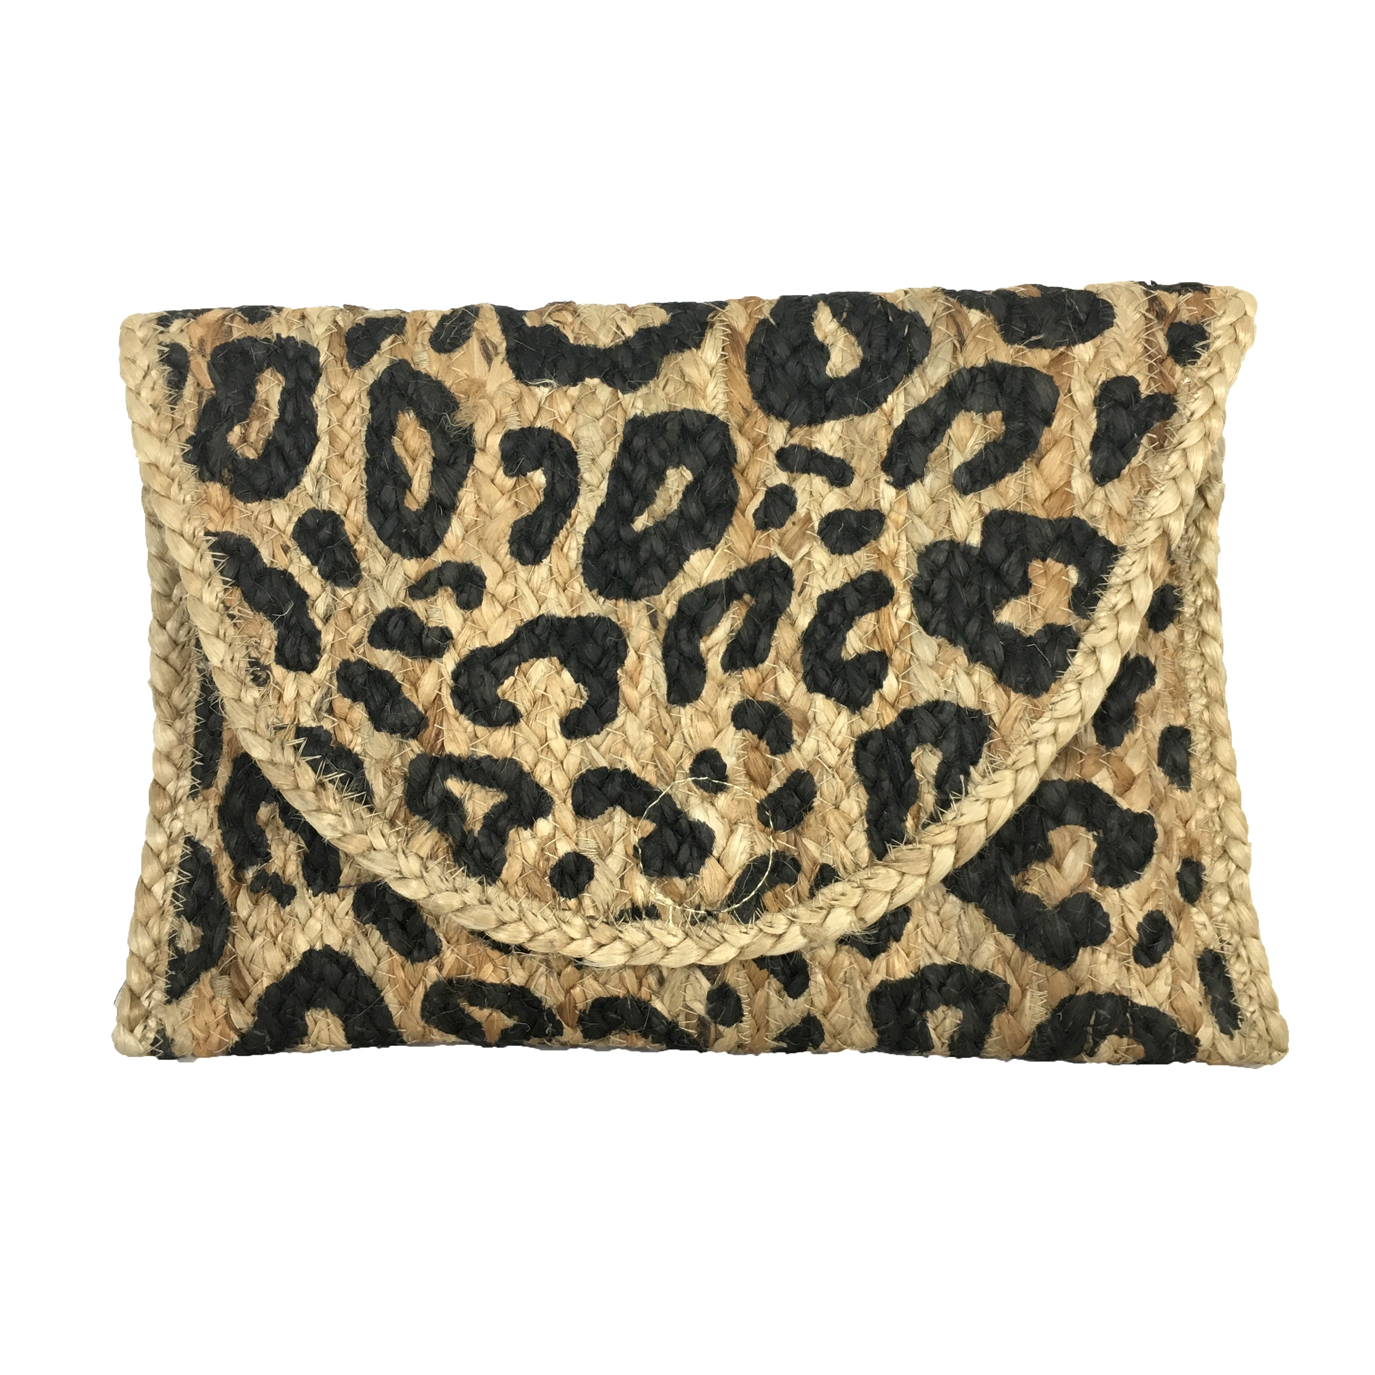 Magid Leopard Print Woven Jute Straw Clutch, Natural - image 1 of 3